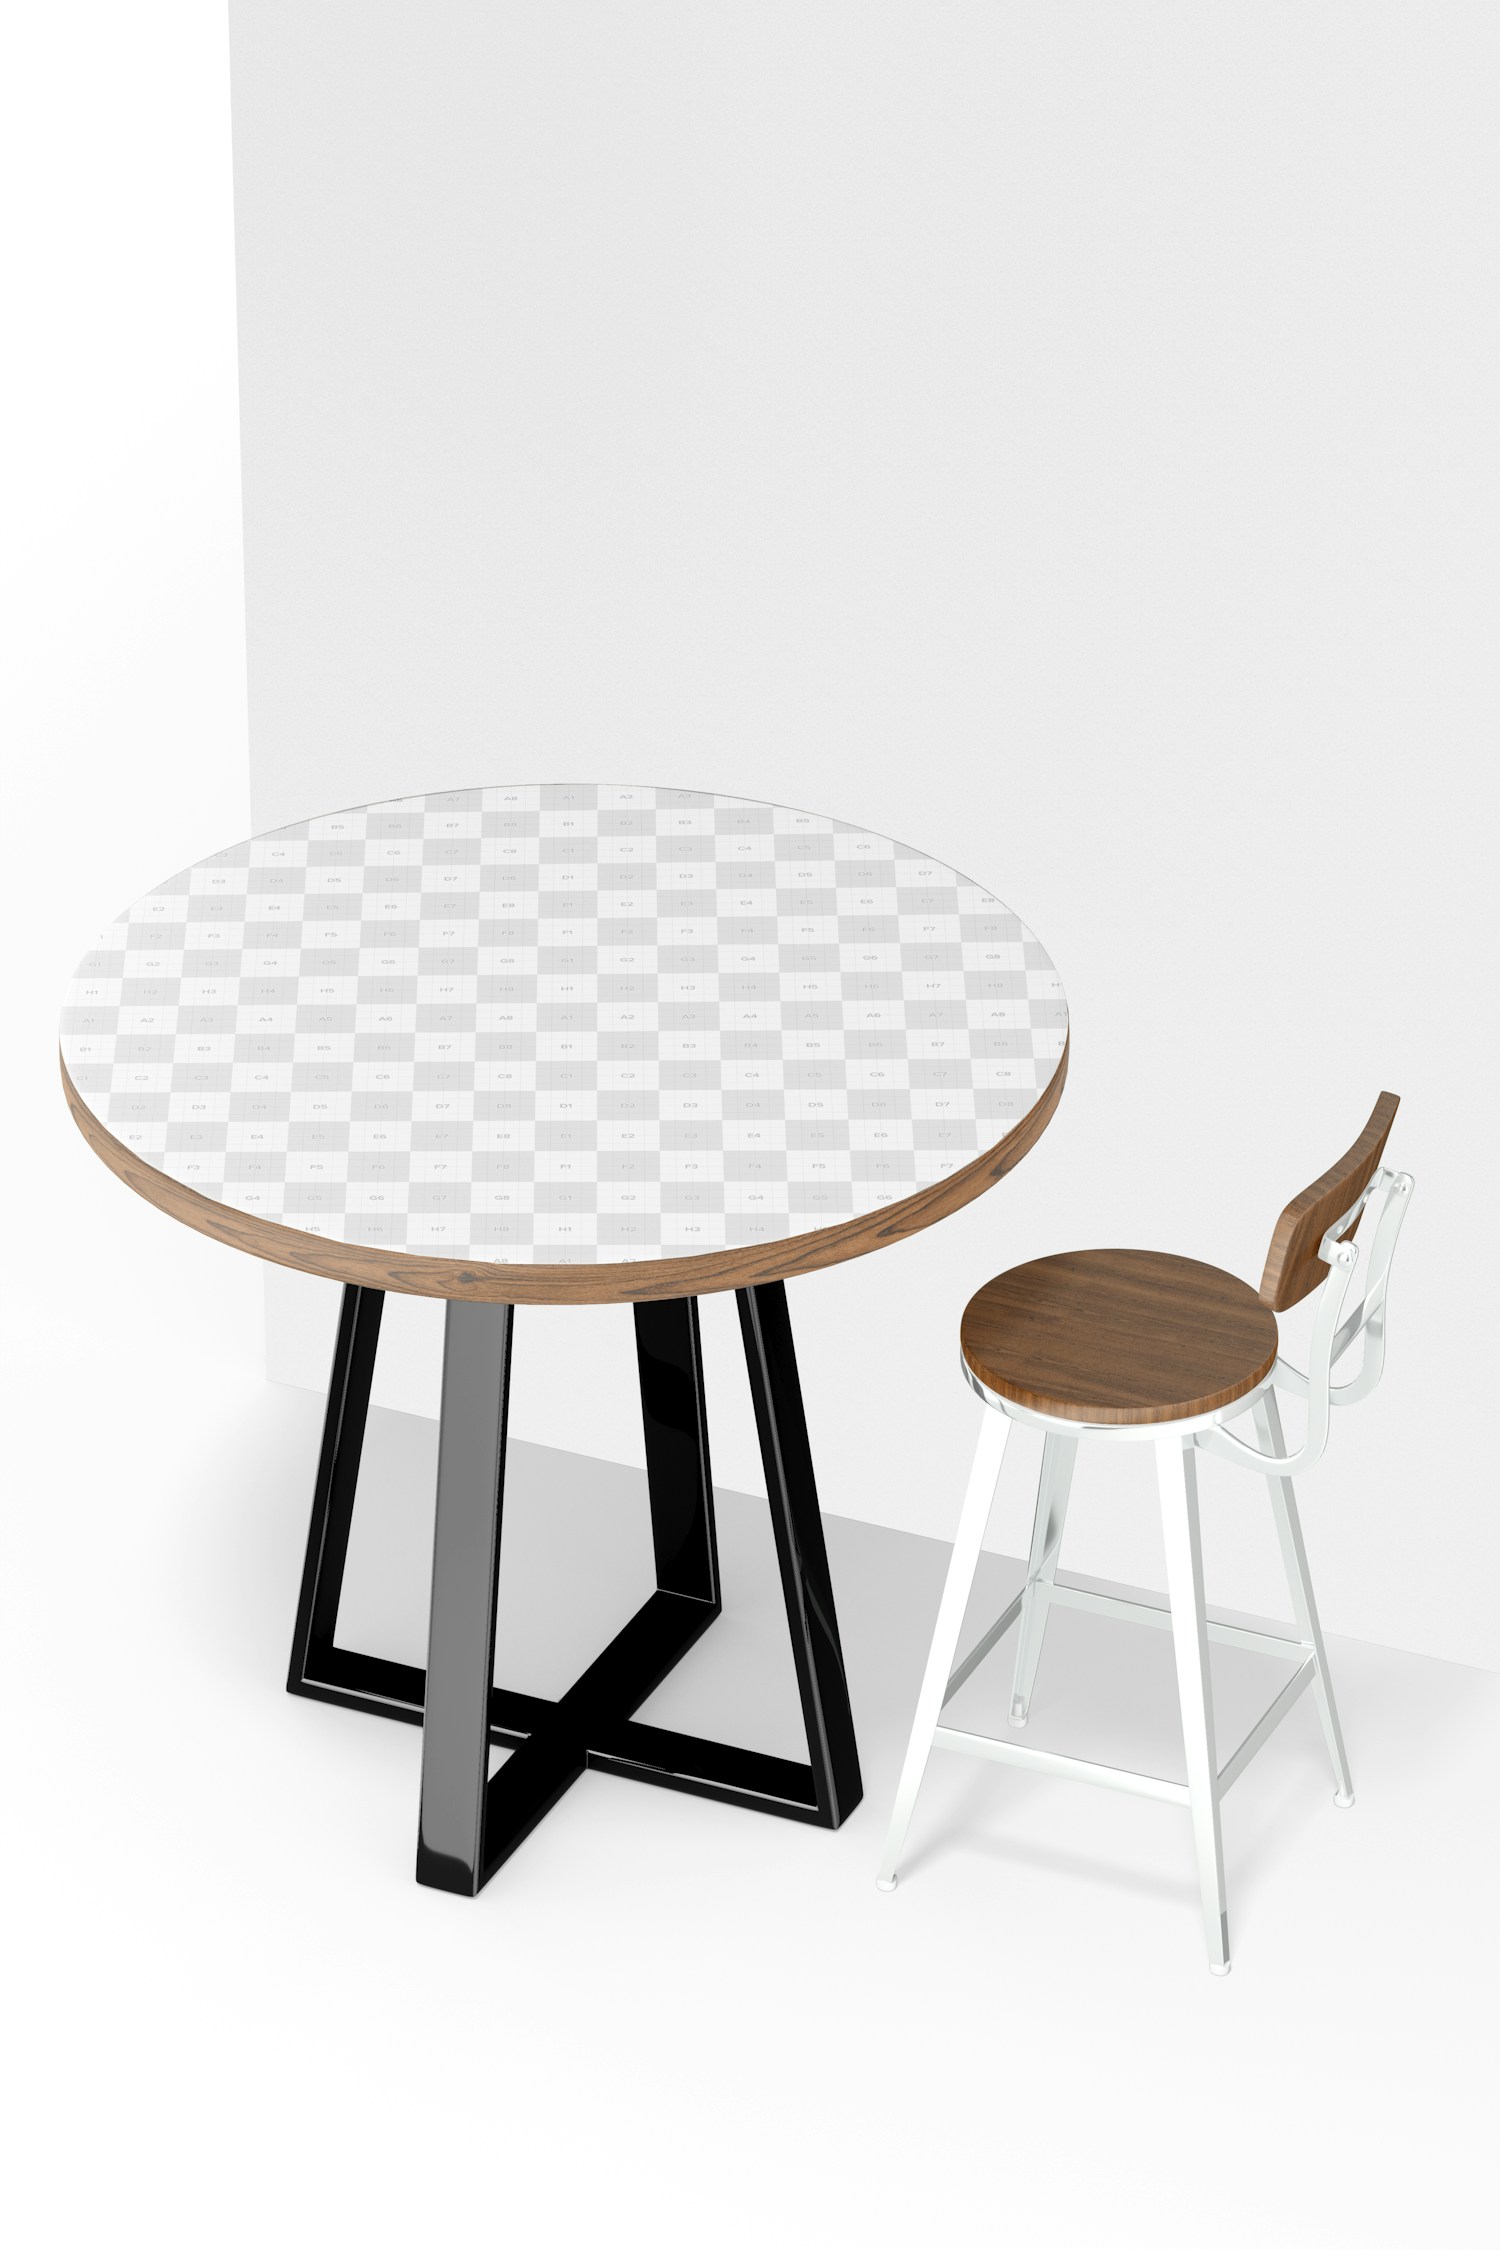 Wooden Round Table Mockup, with Chair